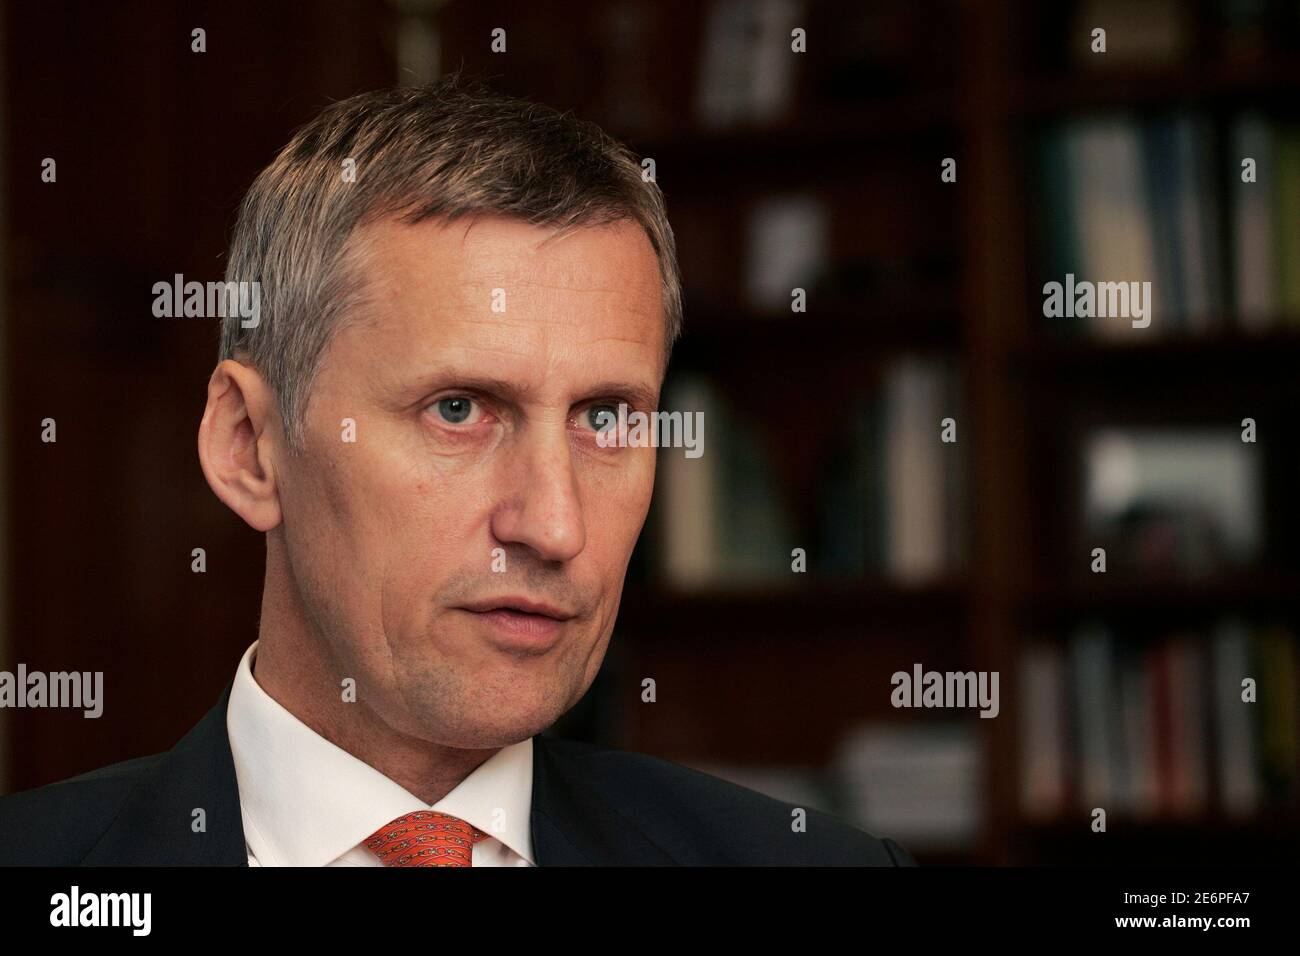 Martin Wheatley, Chief Executive Officer of Hong Kong's Securities and Futures Commission, speaks during the Reuters Regulation Summit in Hong Kong April 28, 2009. REUTERS/Tyrone Siu    (CHINA) Stock Photo